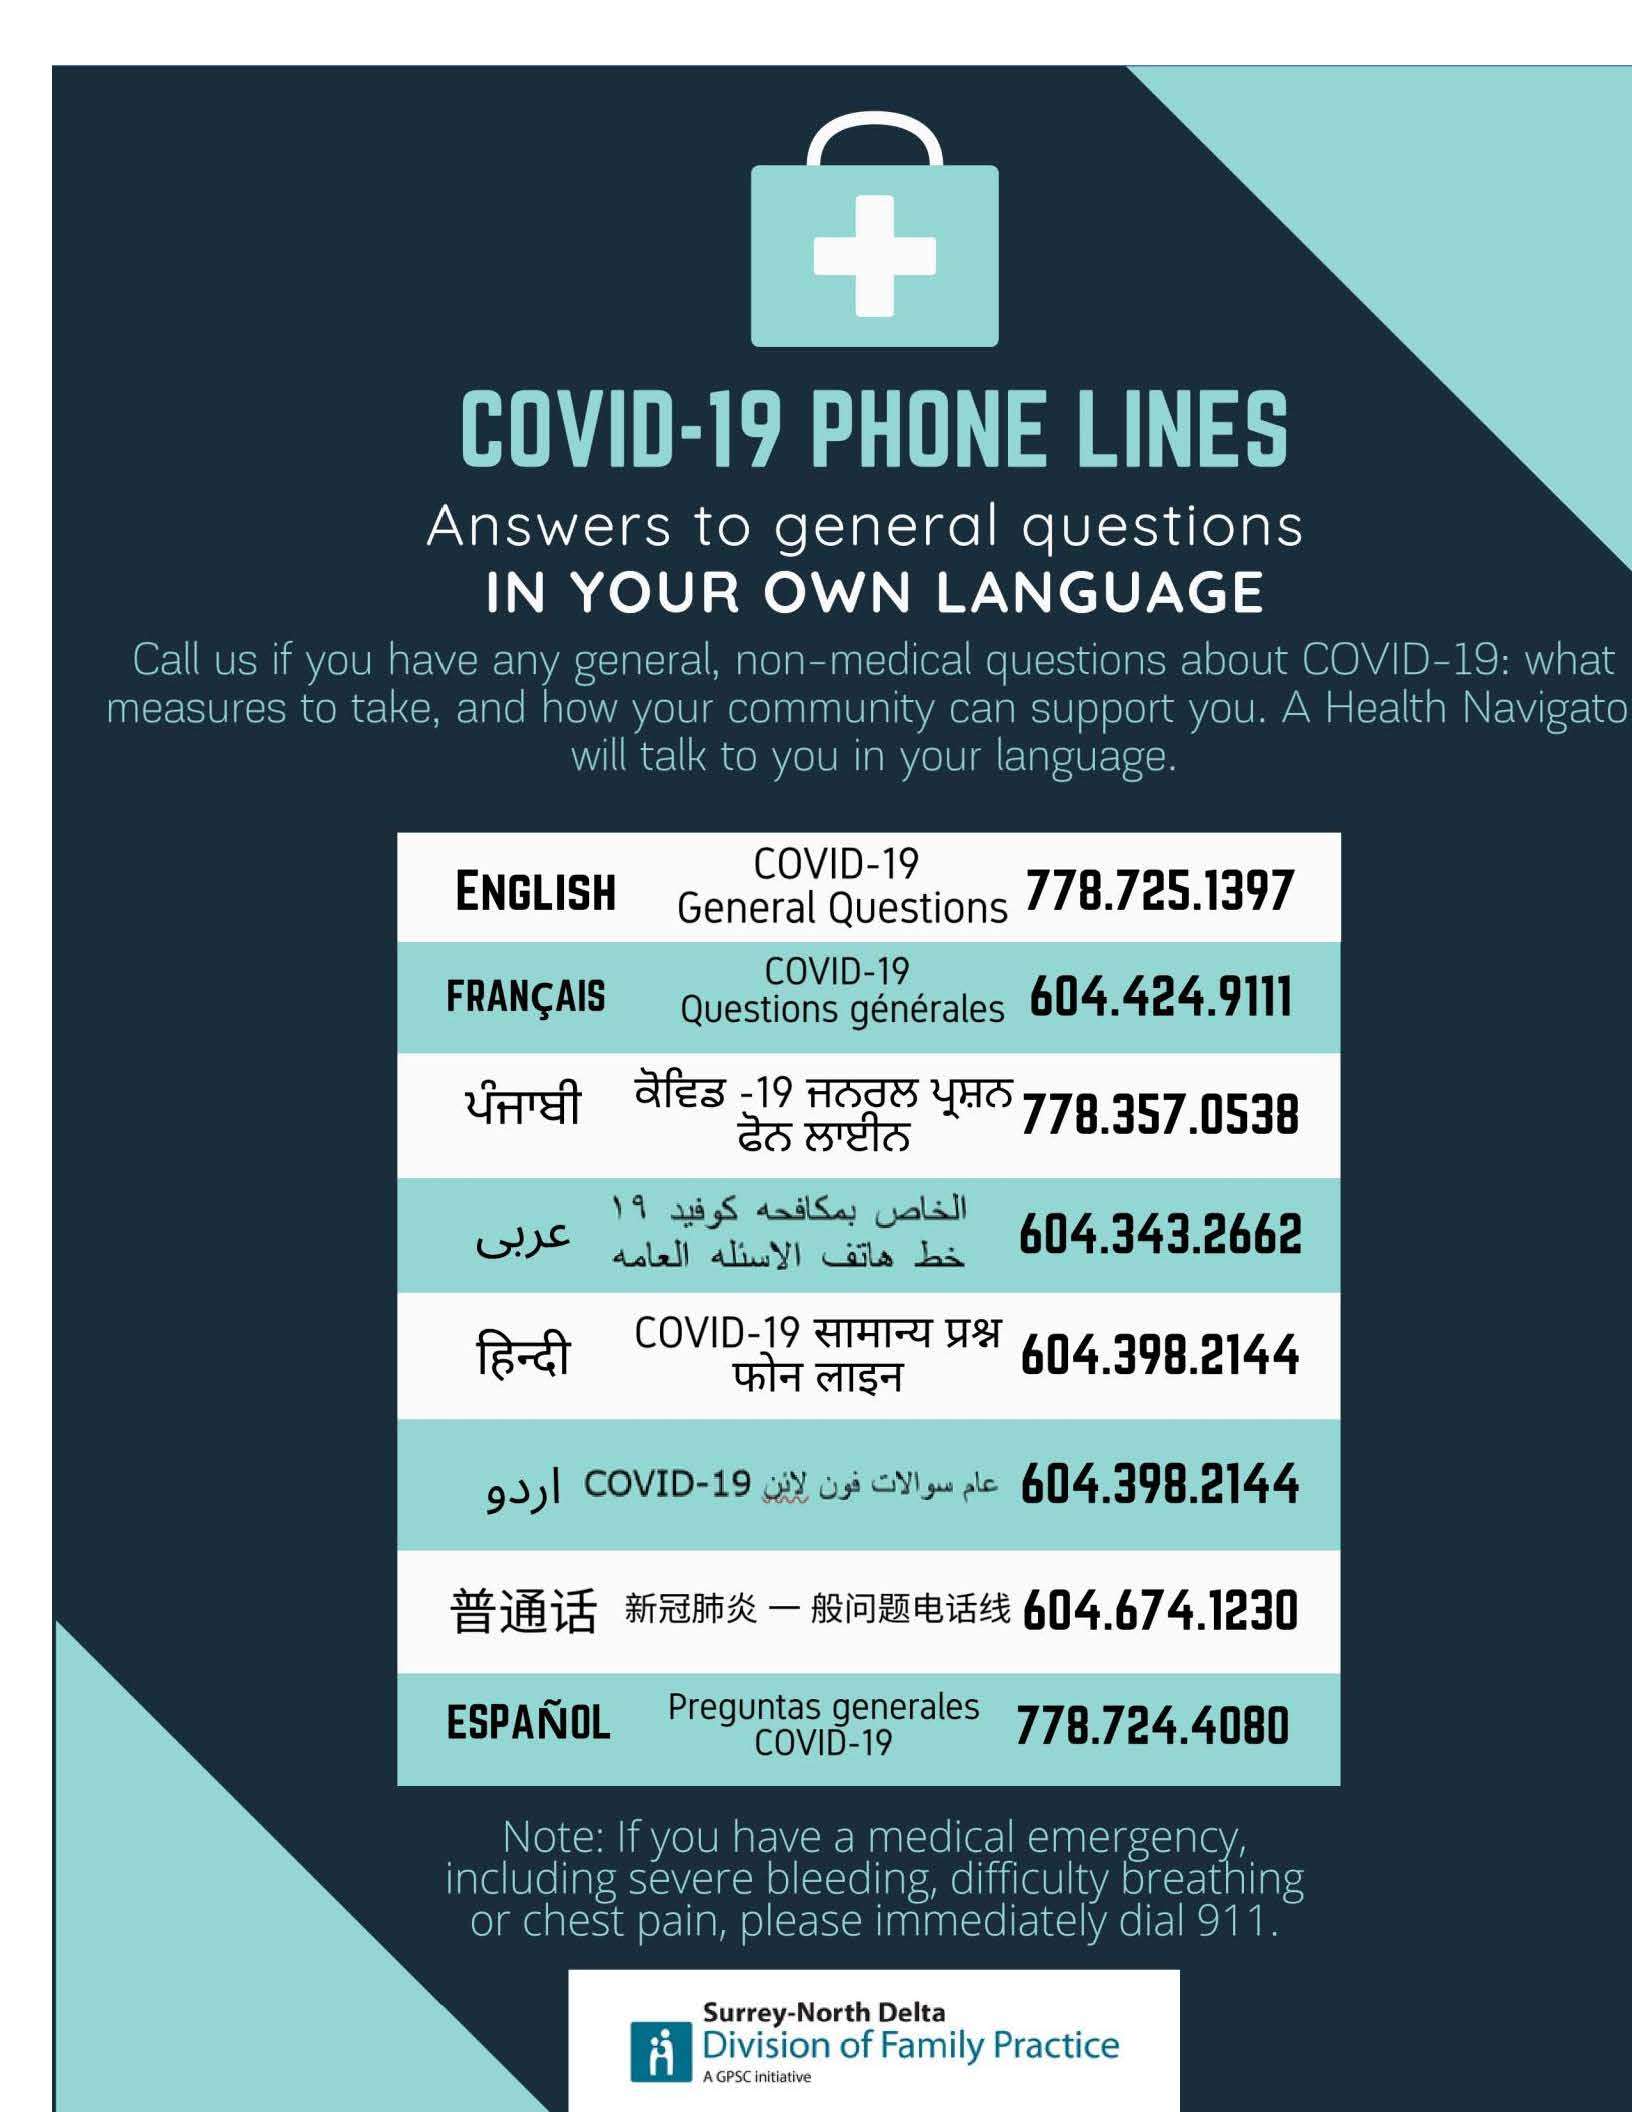 COVID_-_19/COVID-19_Phone_Lines_Pamphlet.jpg